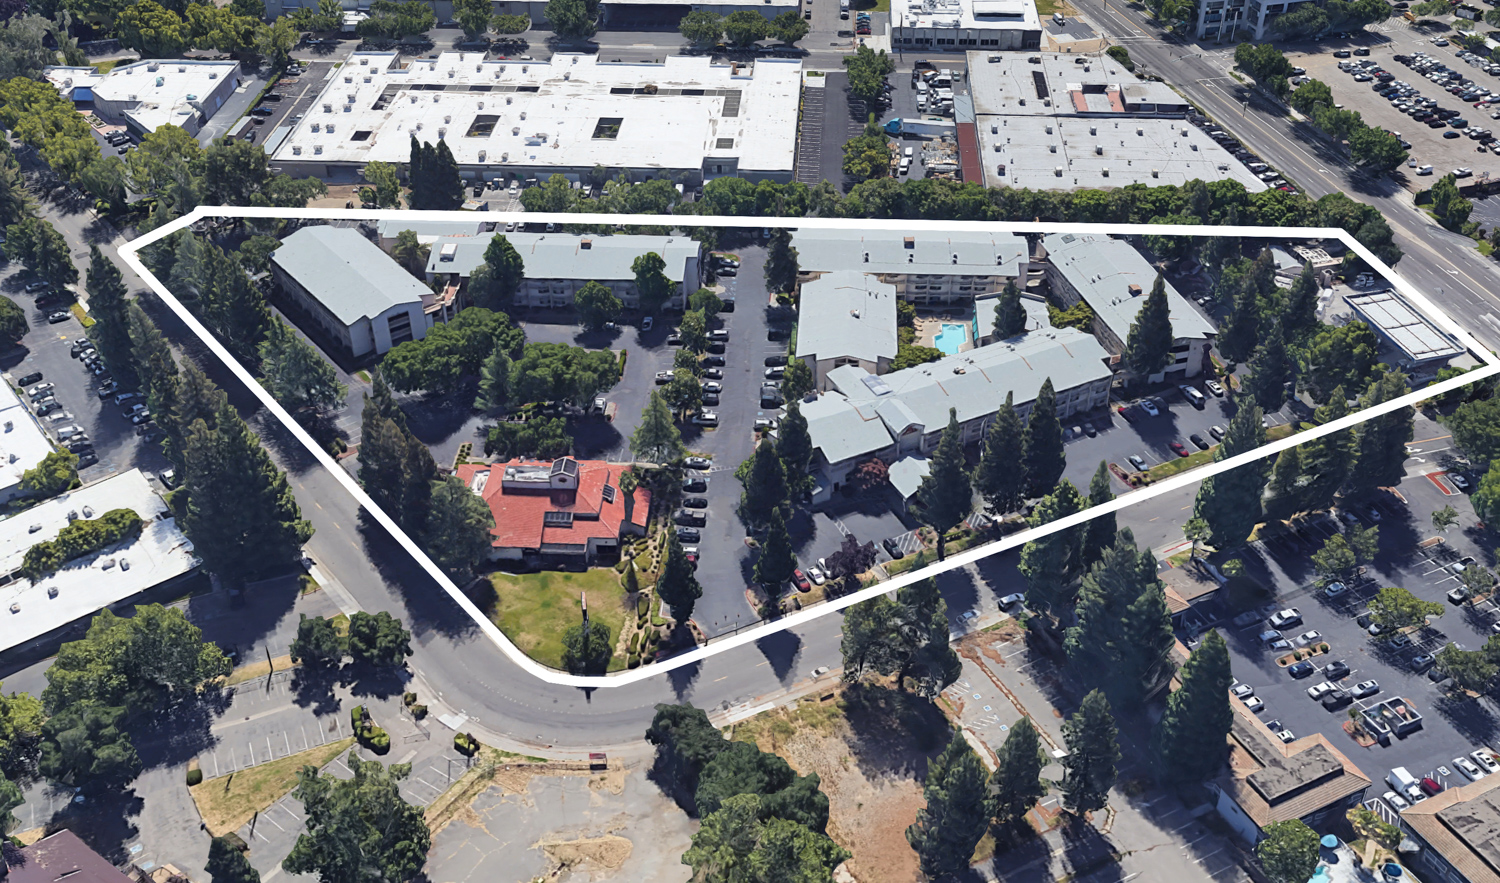 Hawthorn Apartments at 321 Bercut Drive in its existing condition, image via Google Satellite